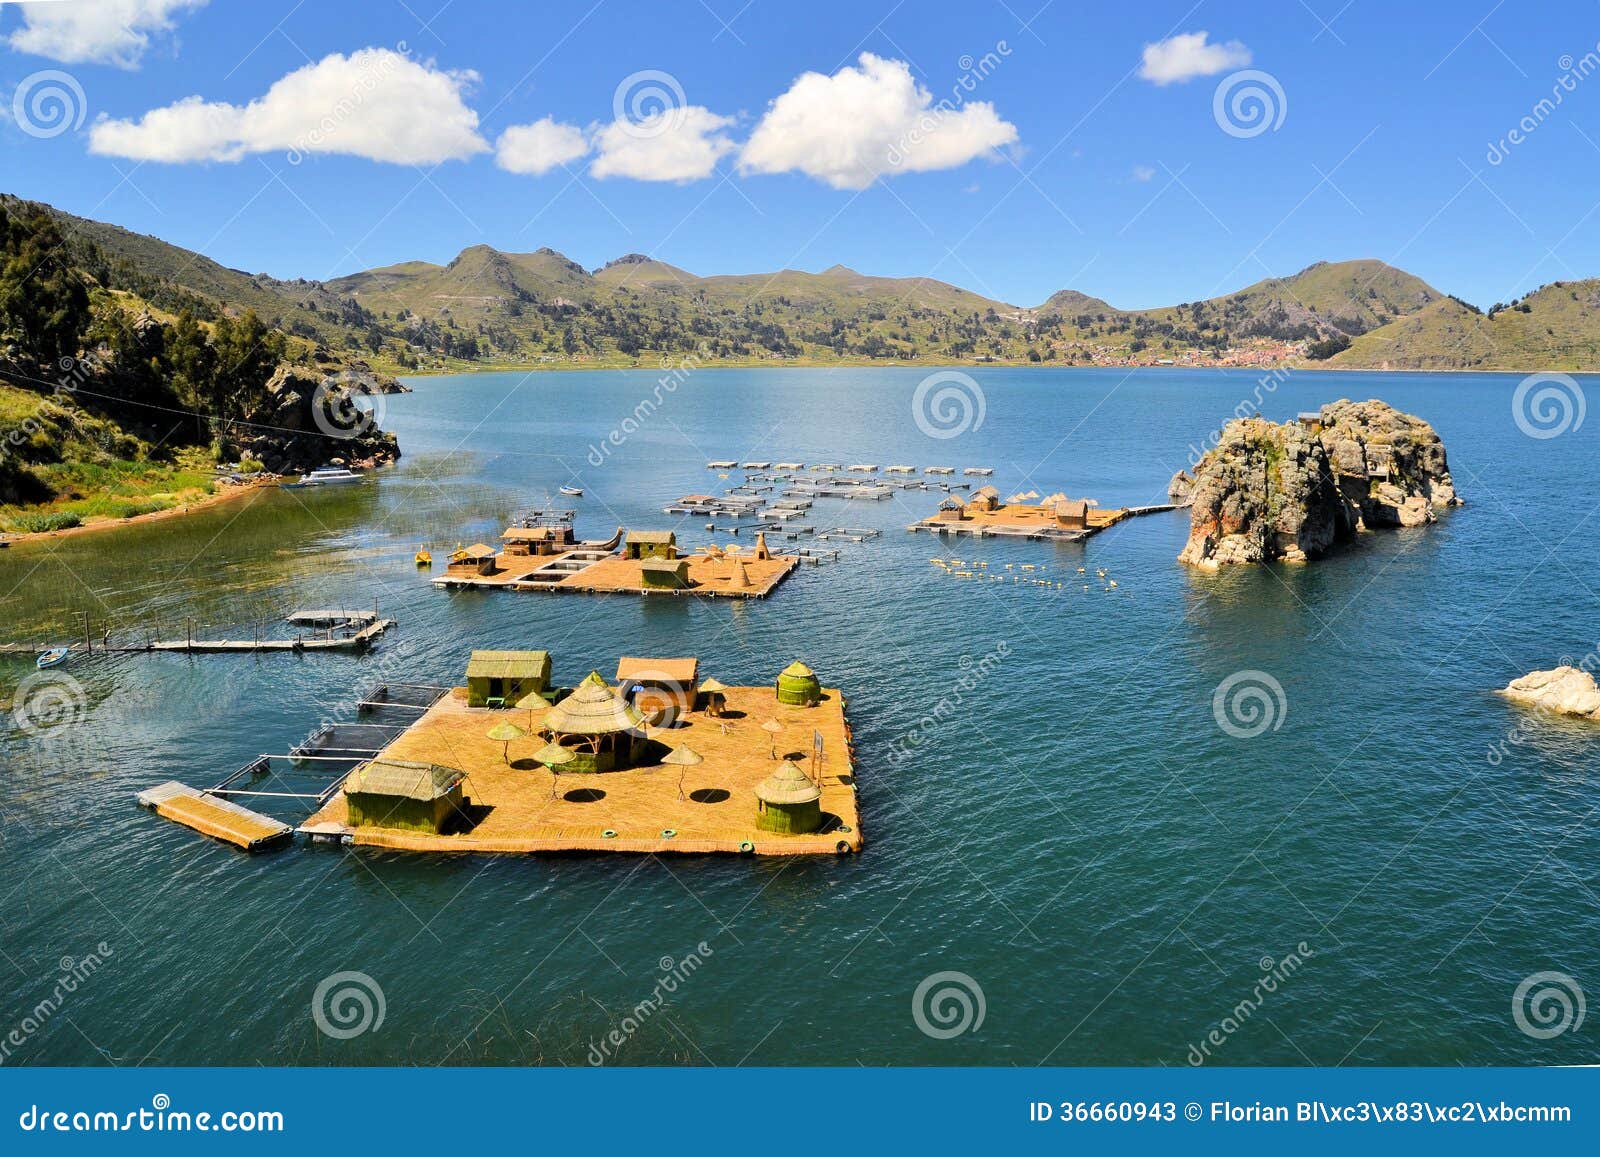 Floating Uros islands on lake Titicaca, largest high altitude lake in 